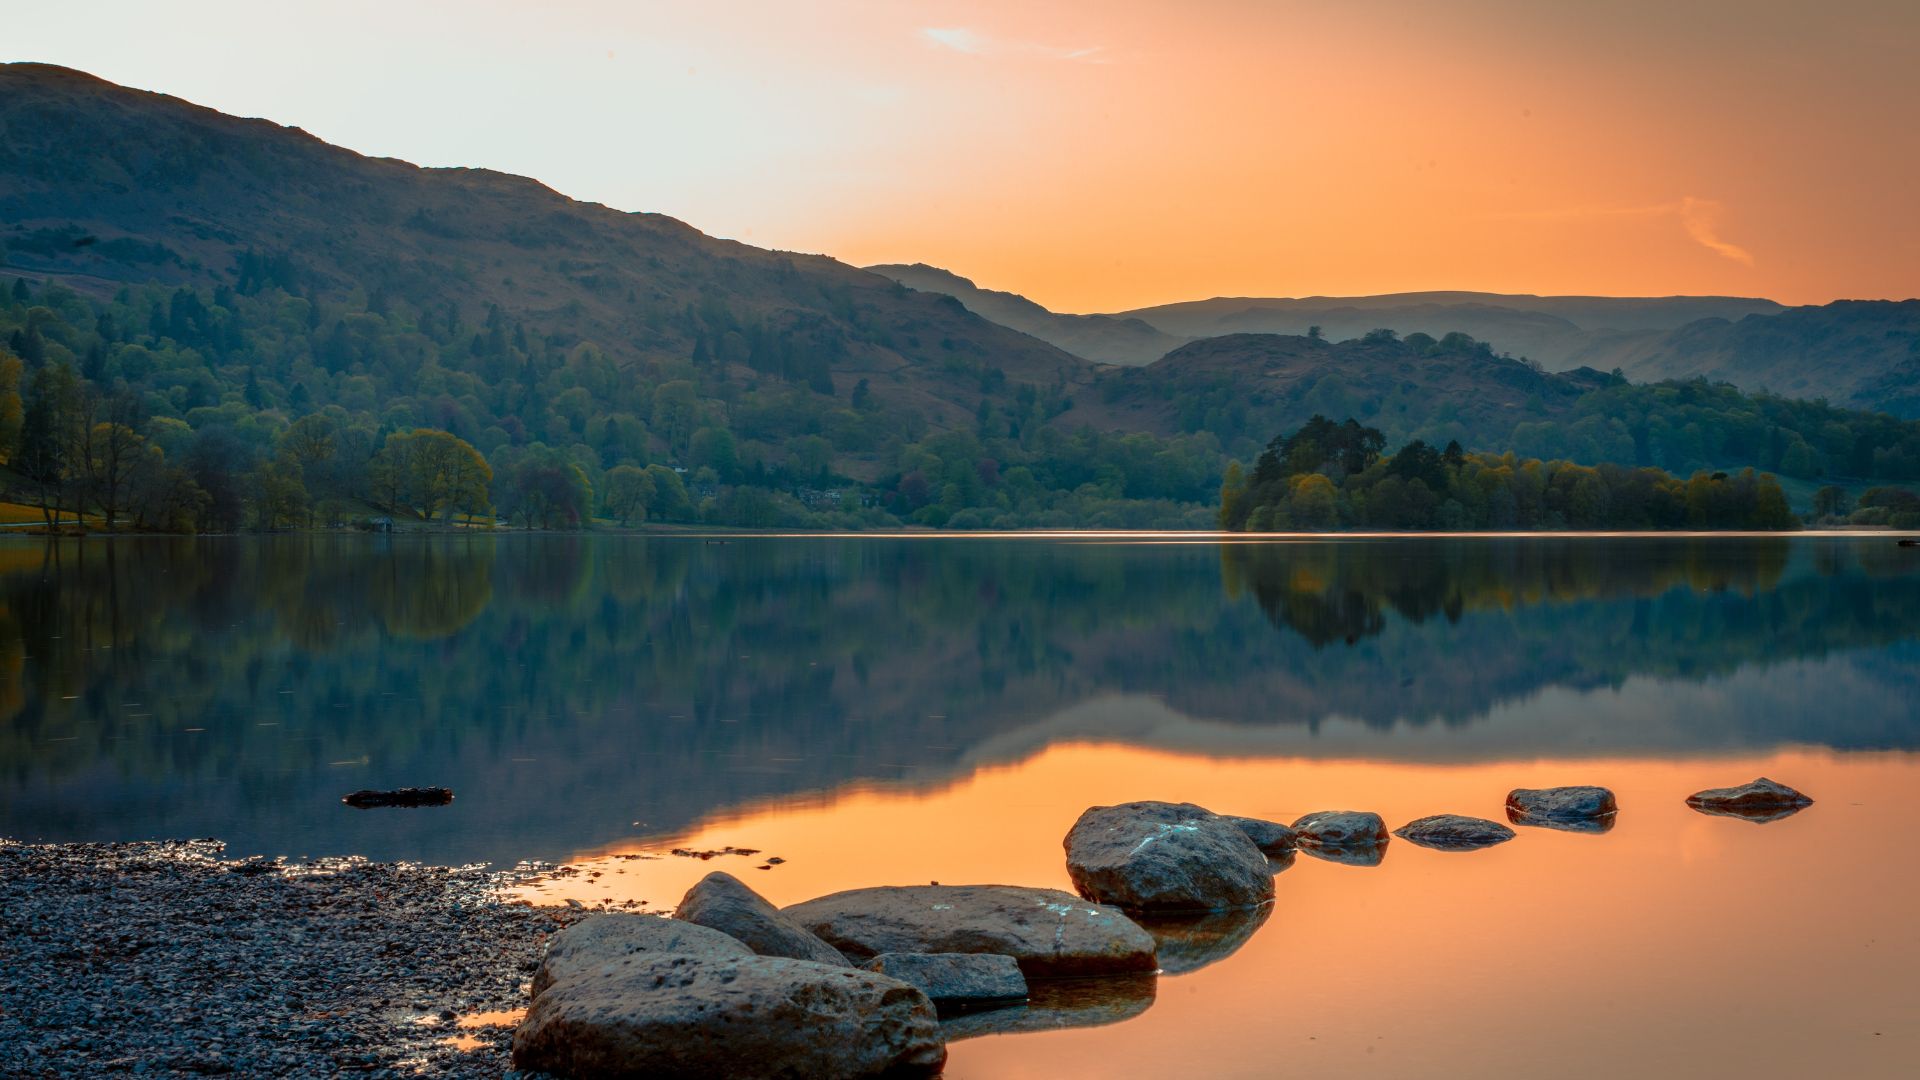 sewage discharges have been recorded in the Lake District